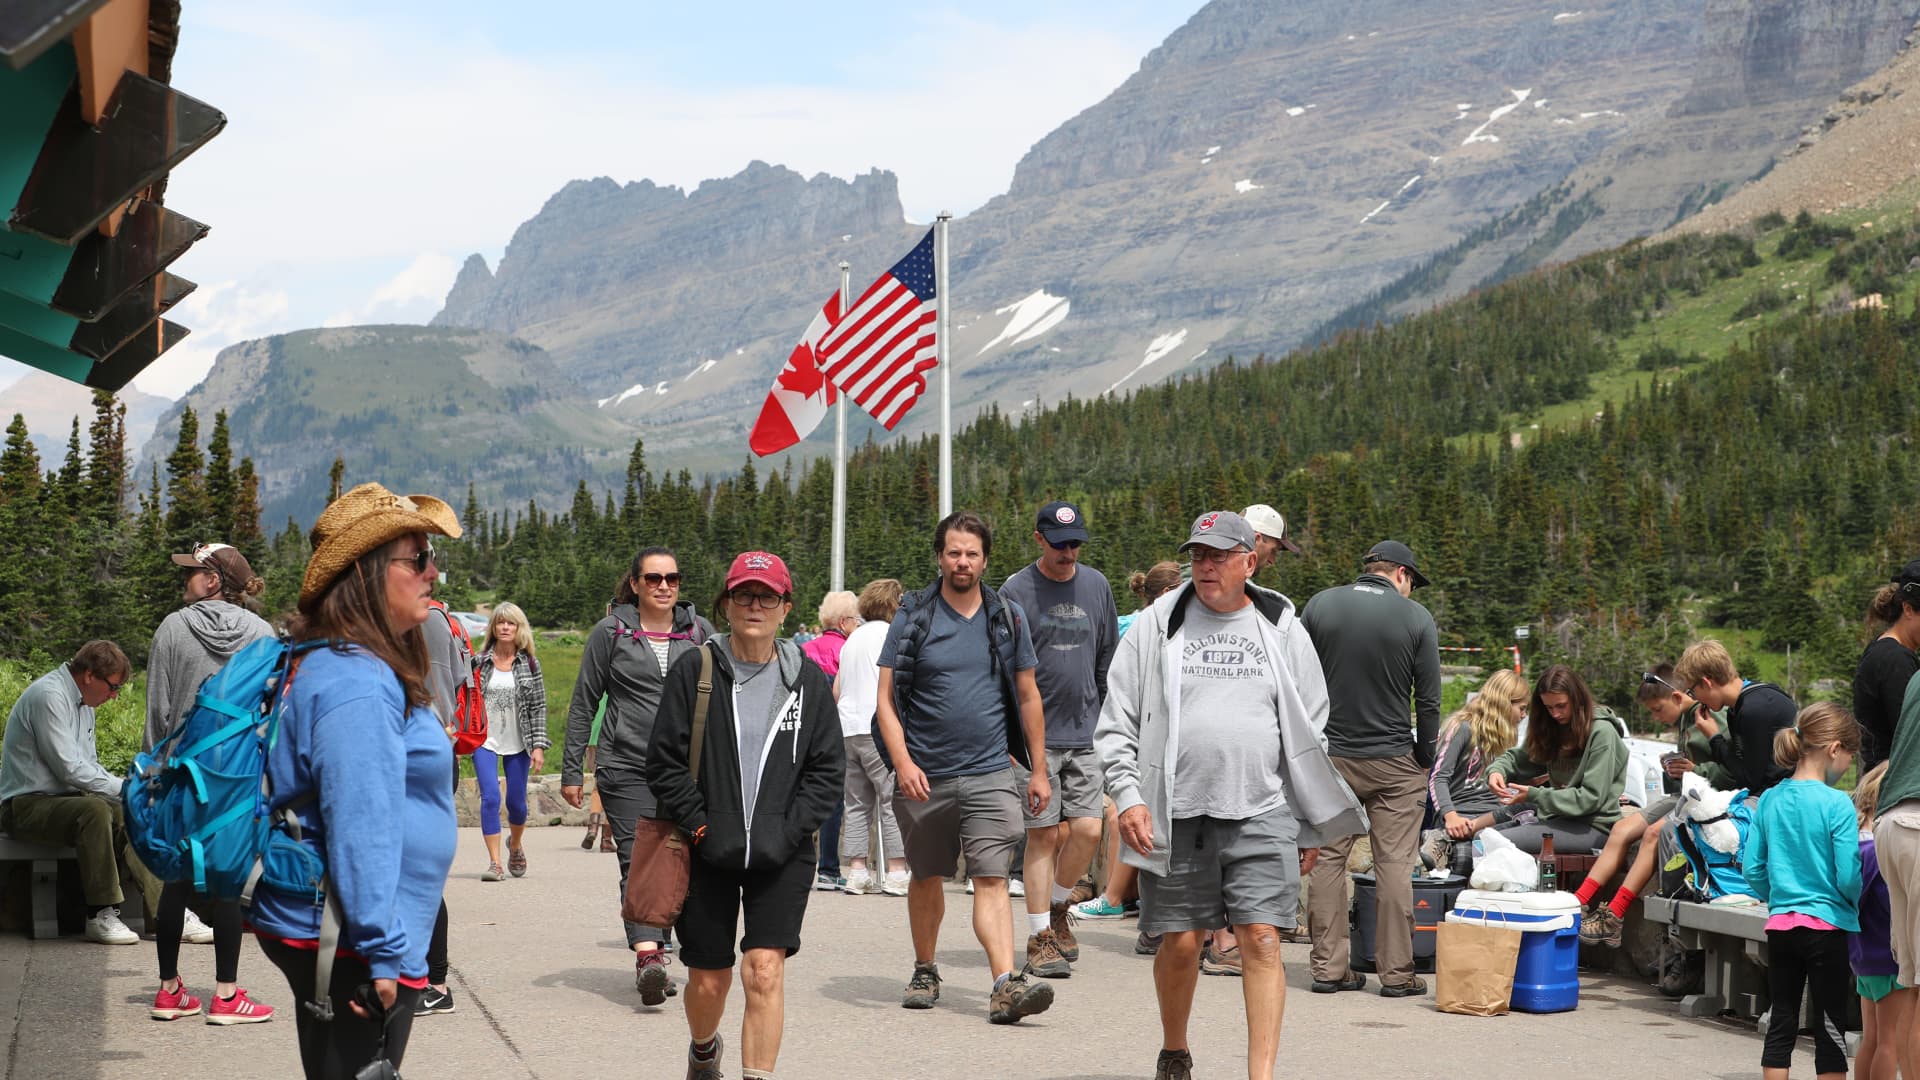 Visitors walk around the Logan Pass Visitor Center in Glacier National Park on July 26, 2018 in West Glacier, Montana.